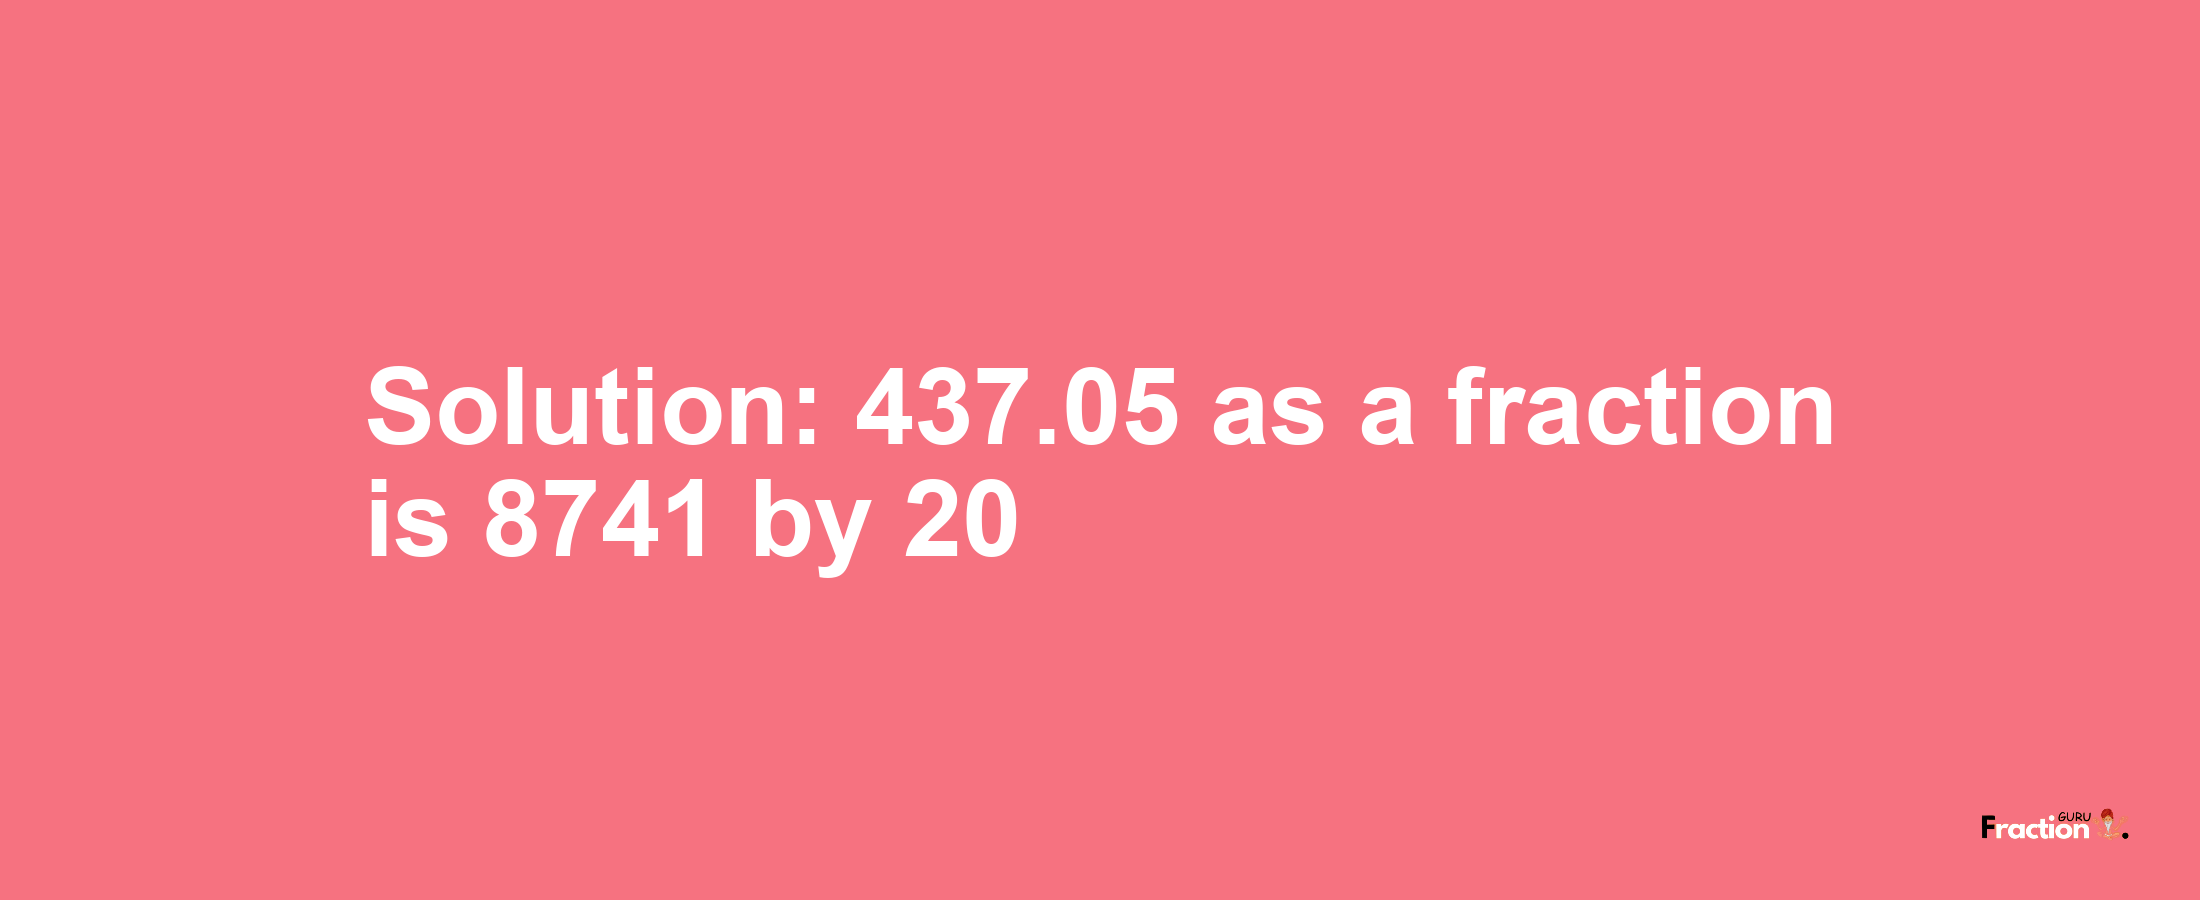 Solution:437.05 as a fraction is 8741/20